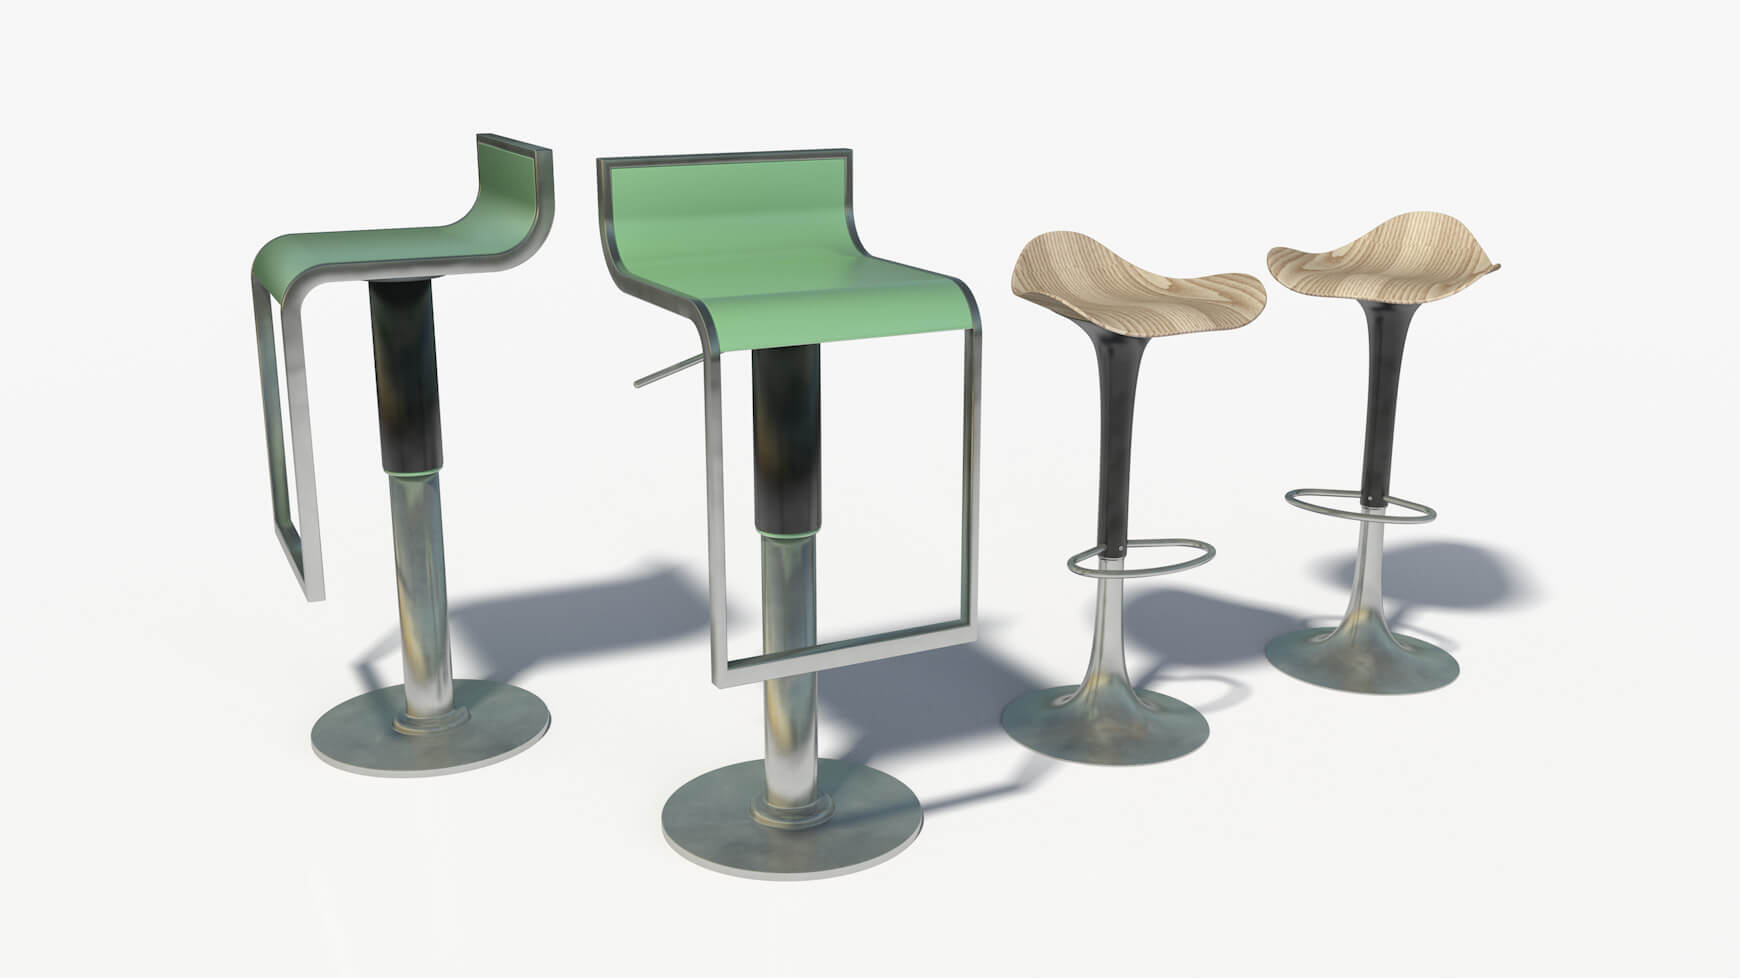 Free Cinema 4D 3D Model Furniture Pack Chairs and Tables